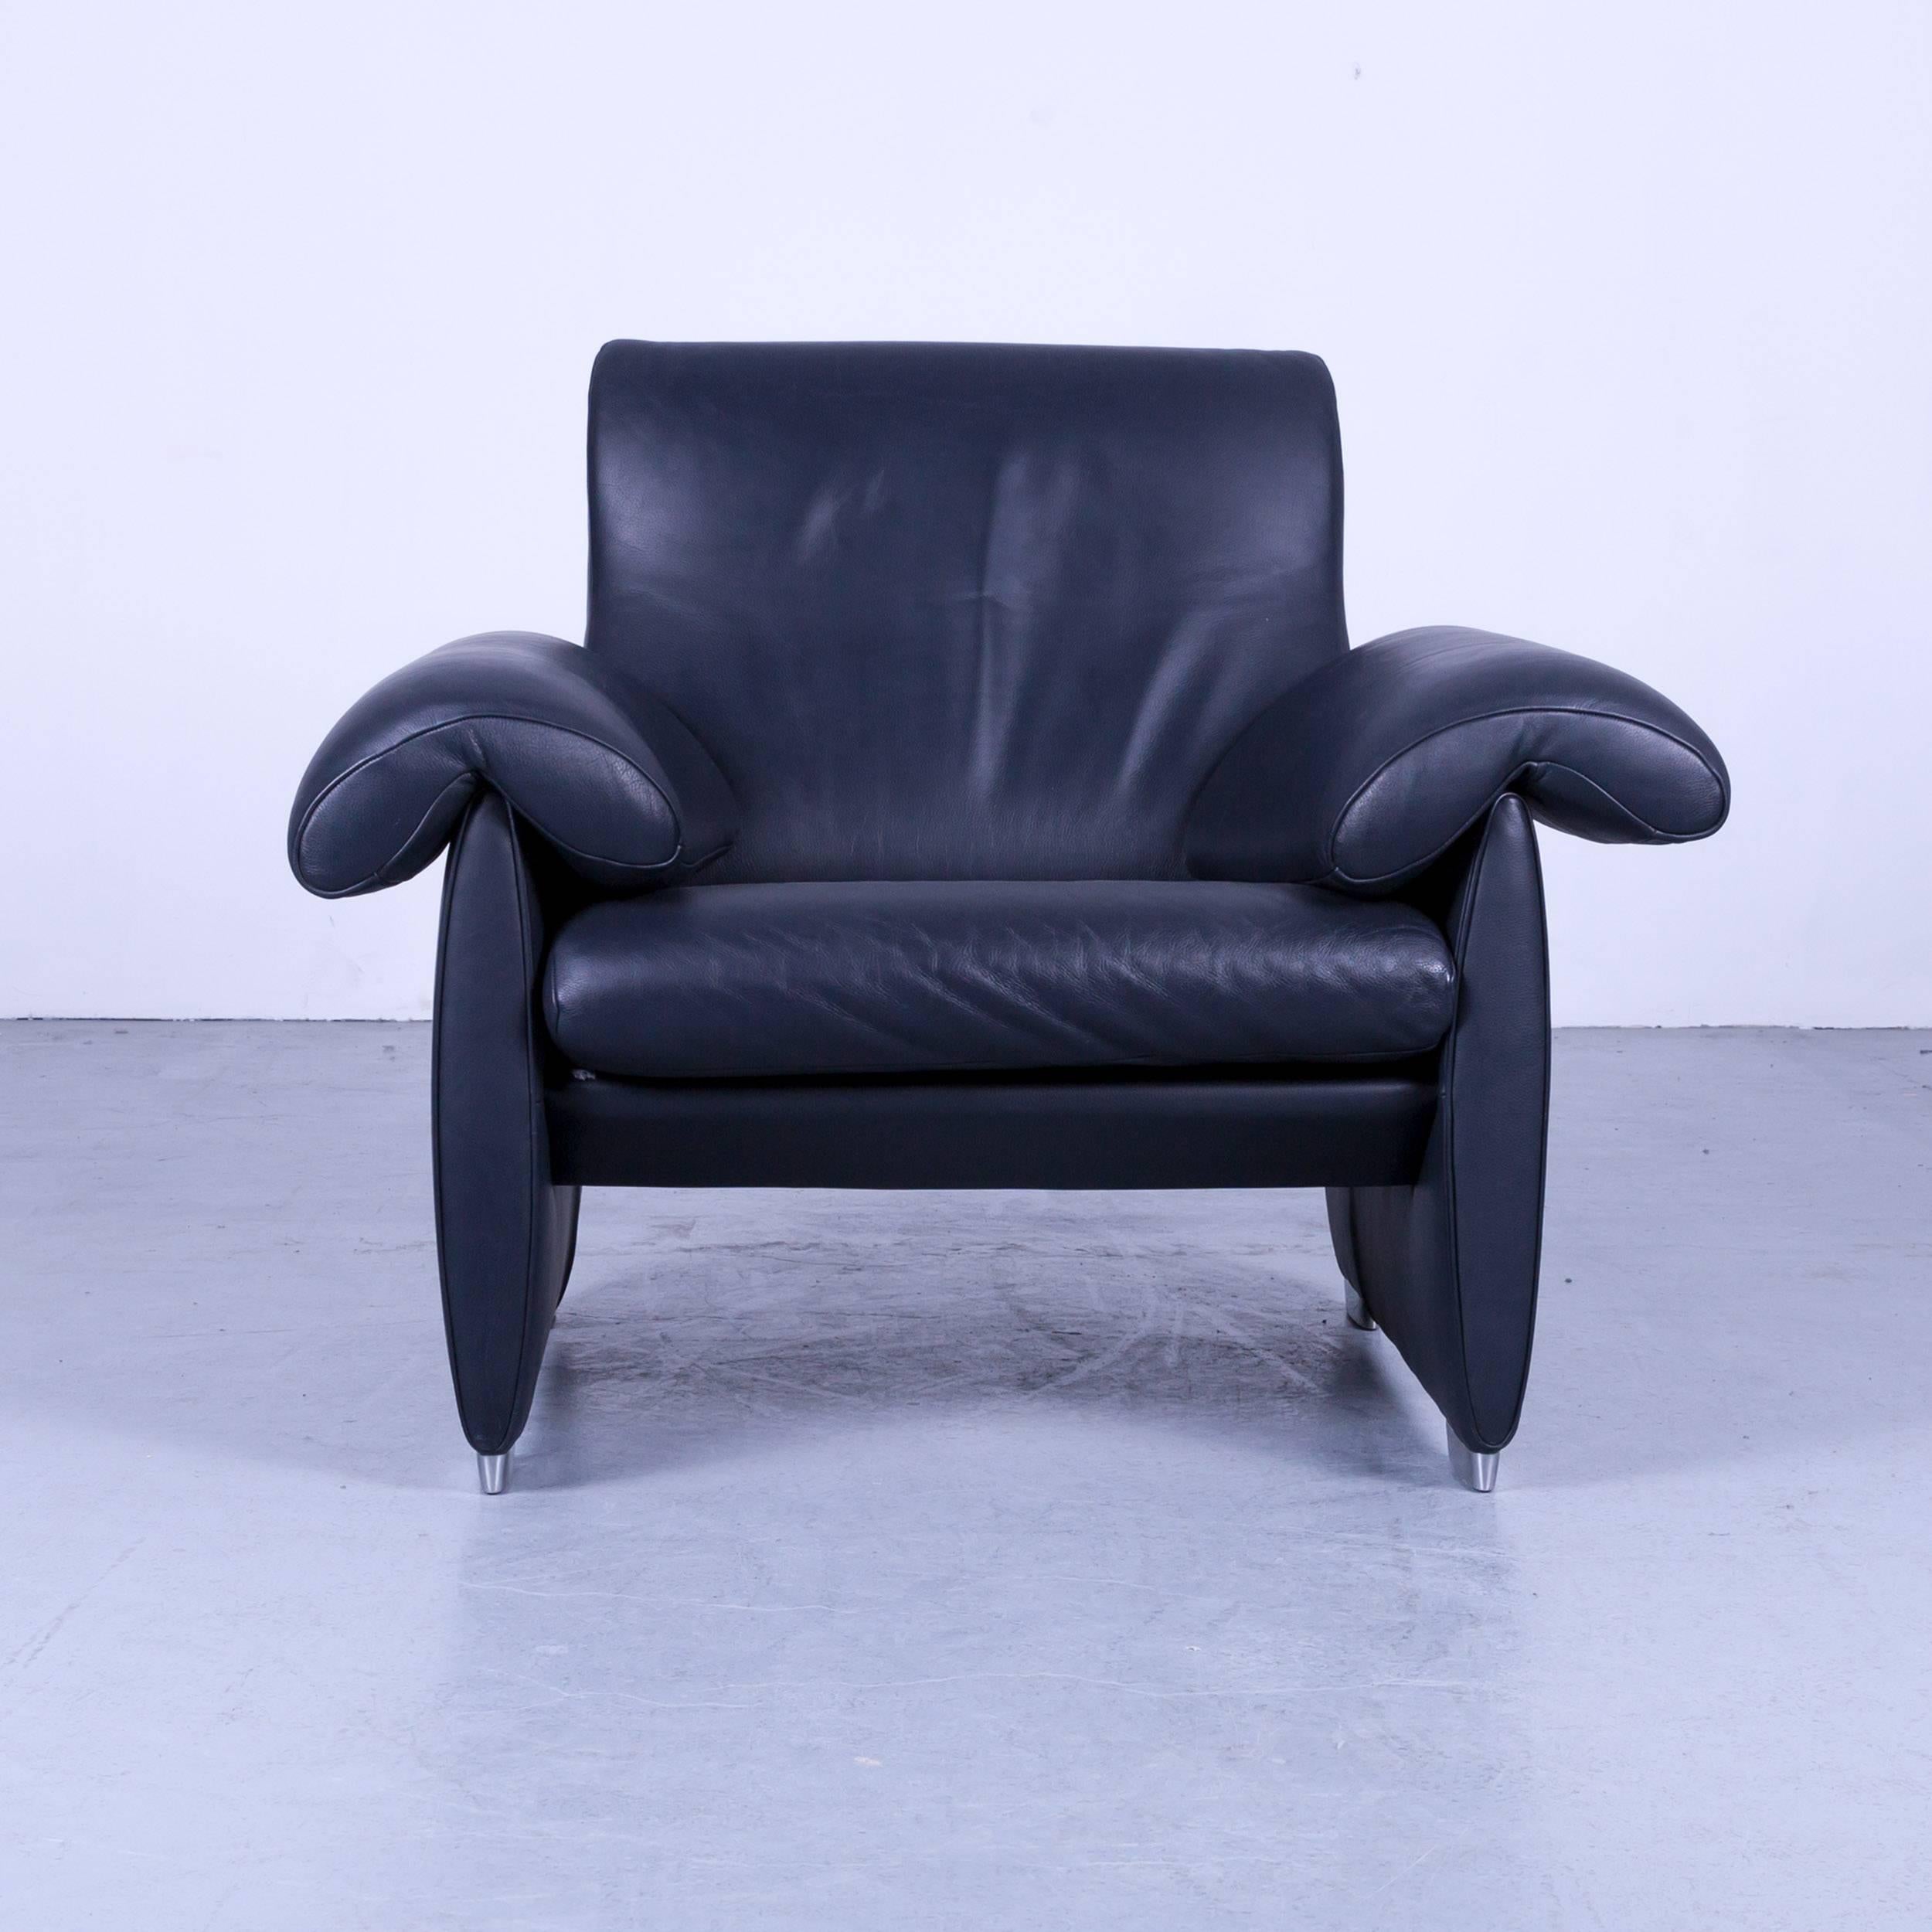 de Sede DS 10 designer leather armchair dark navy blue one-seat from Switzerland, made for pure comfort and style.